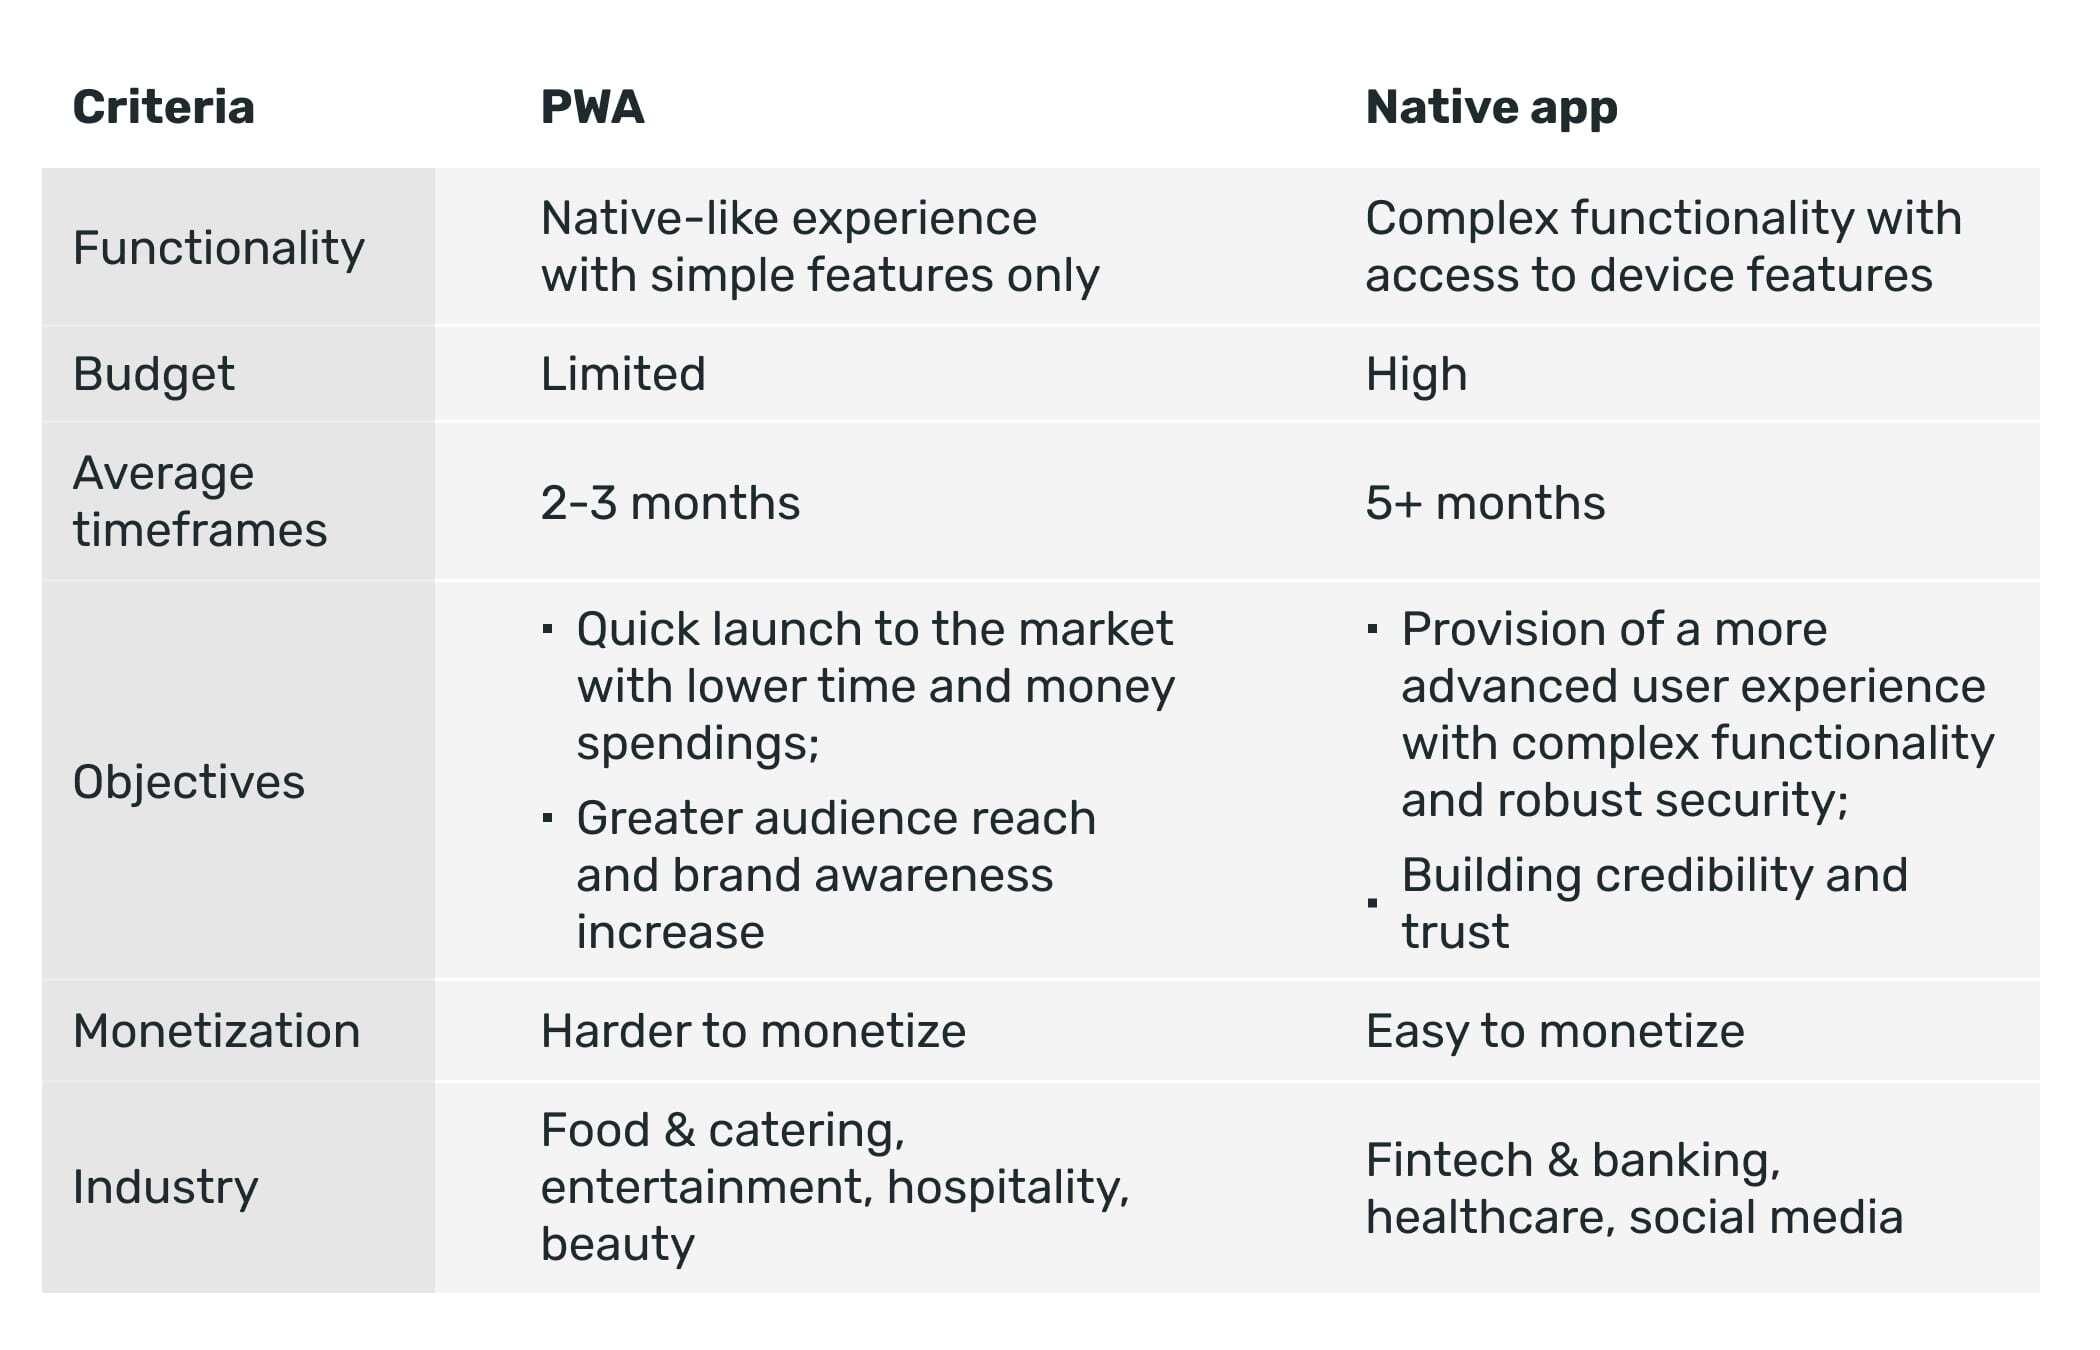 How to choose between PWA and native app